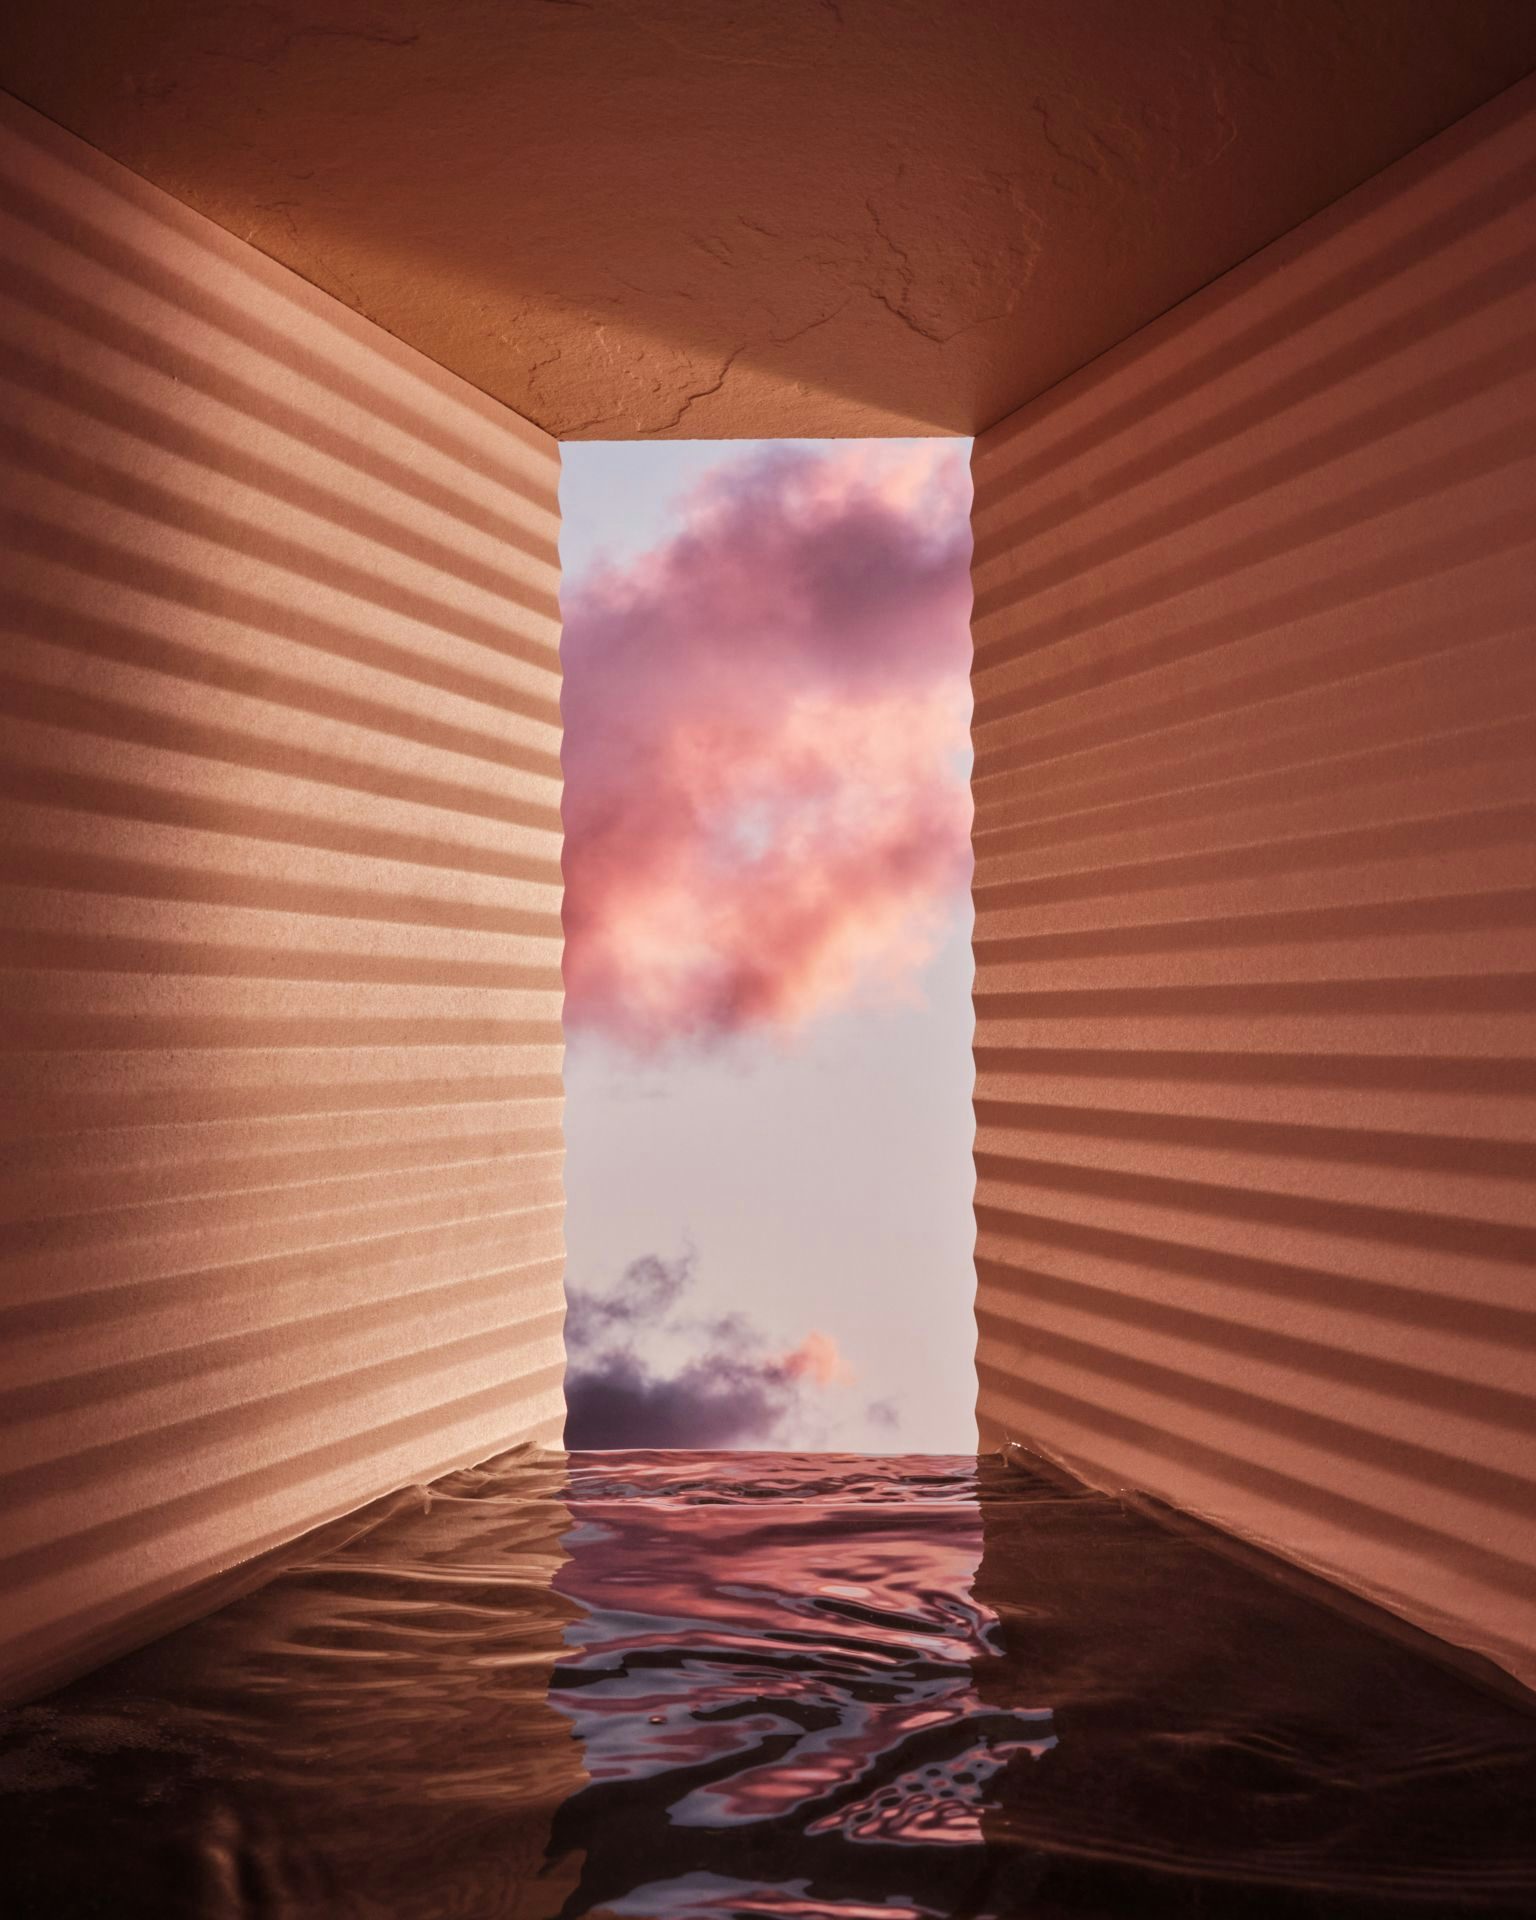 An abstract room with water, walls opening to the sky.